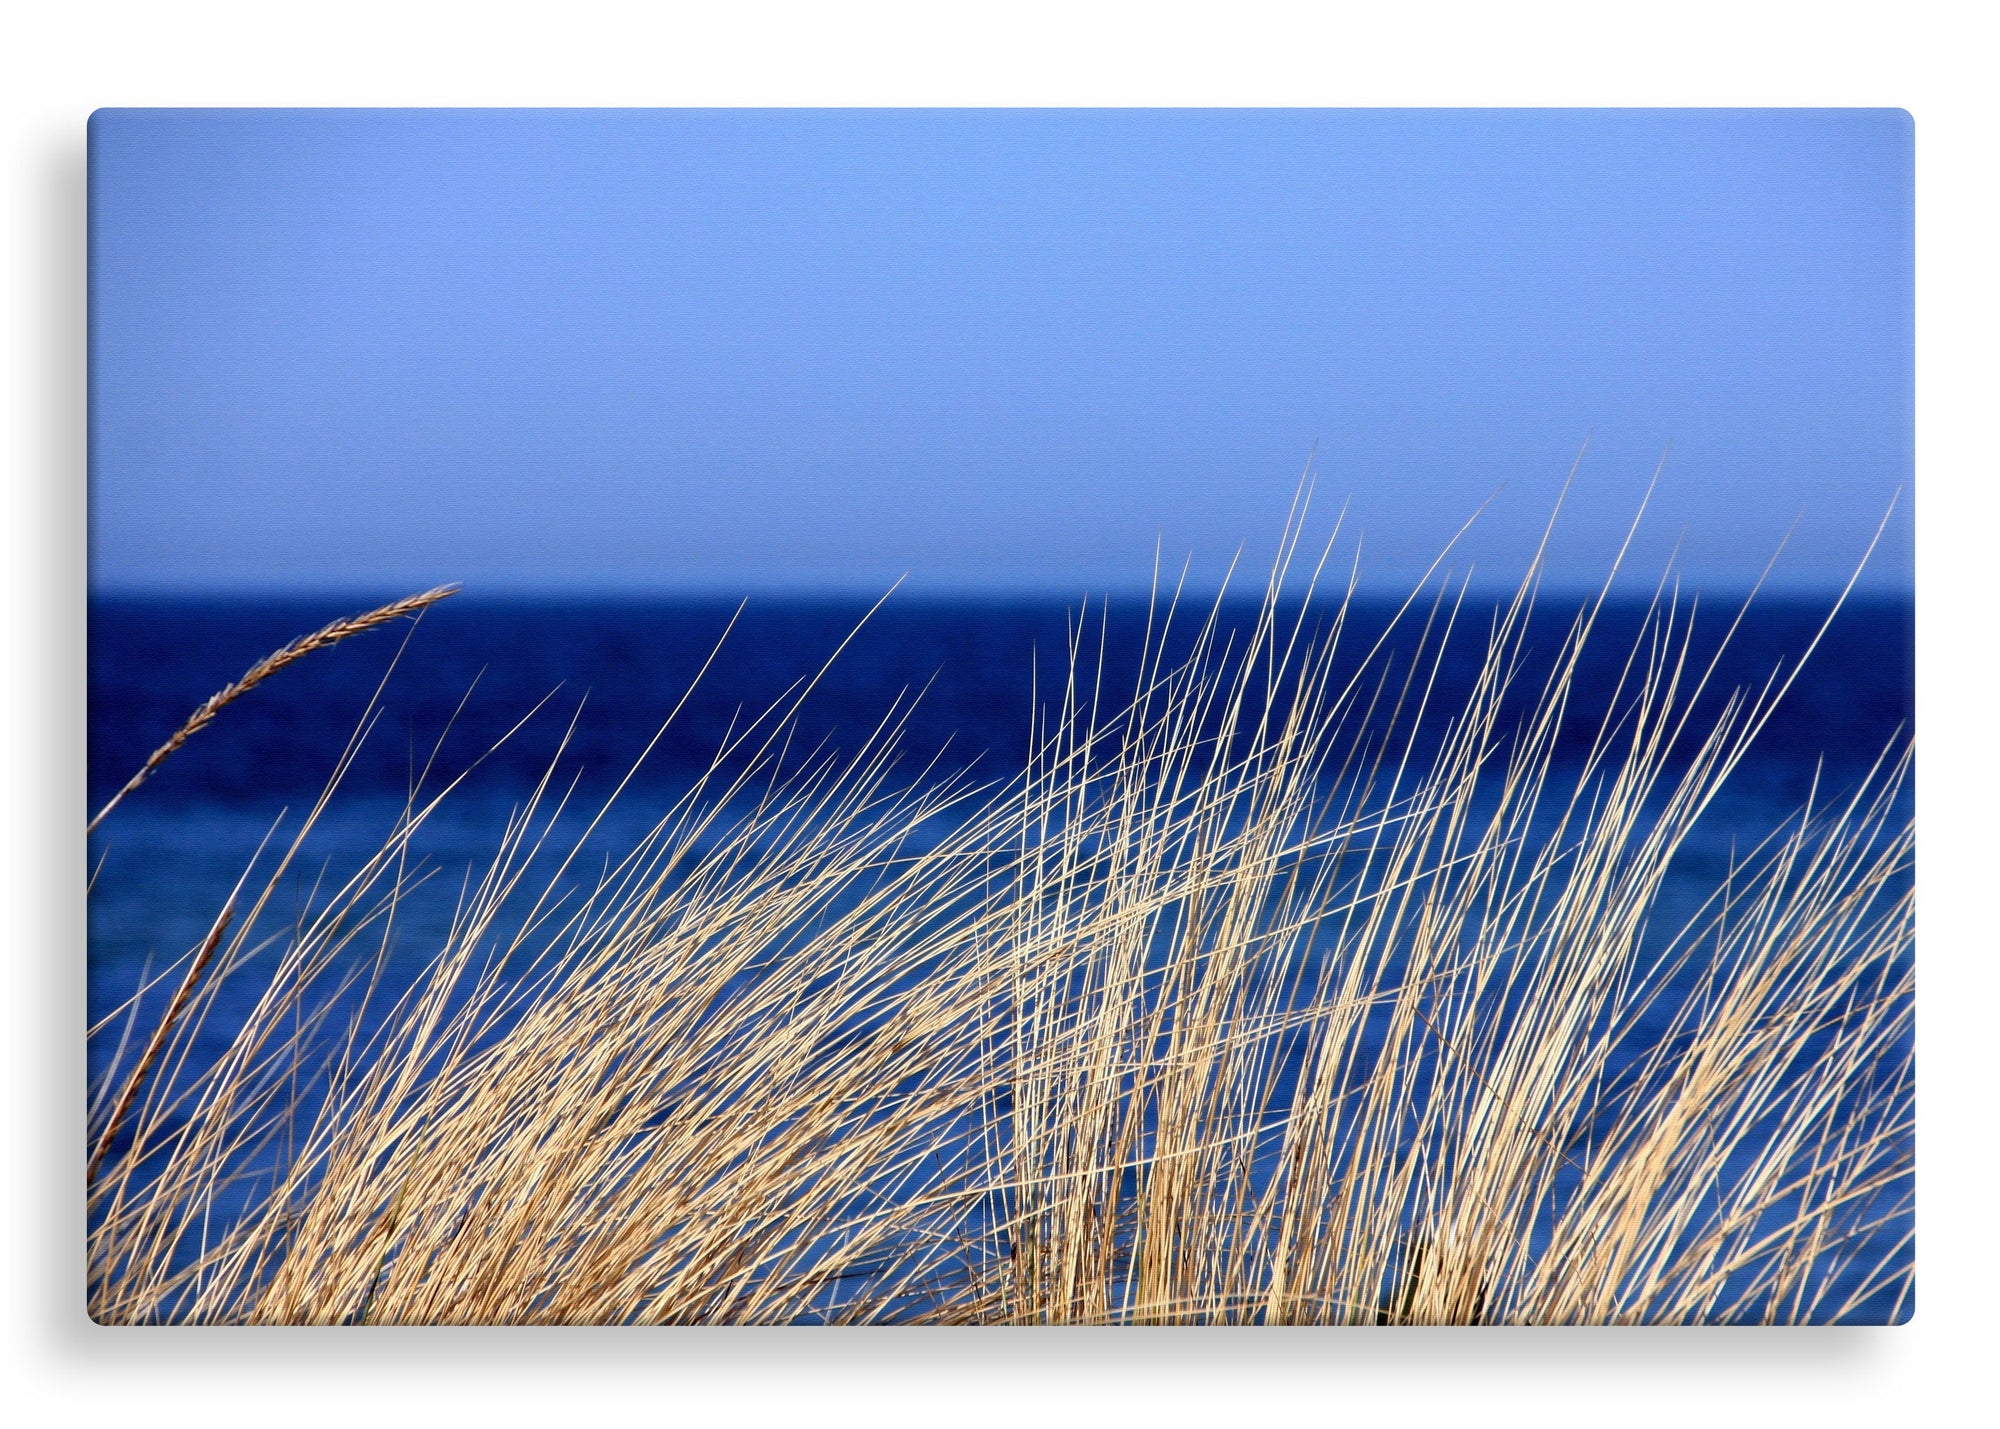 Grass by the Sea